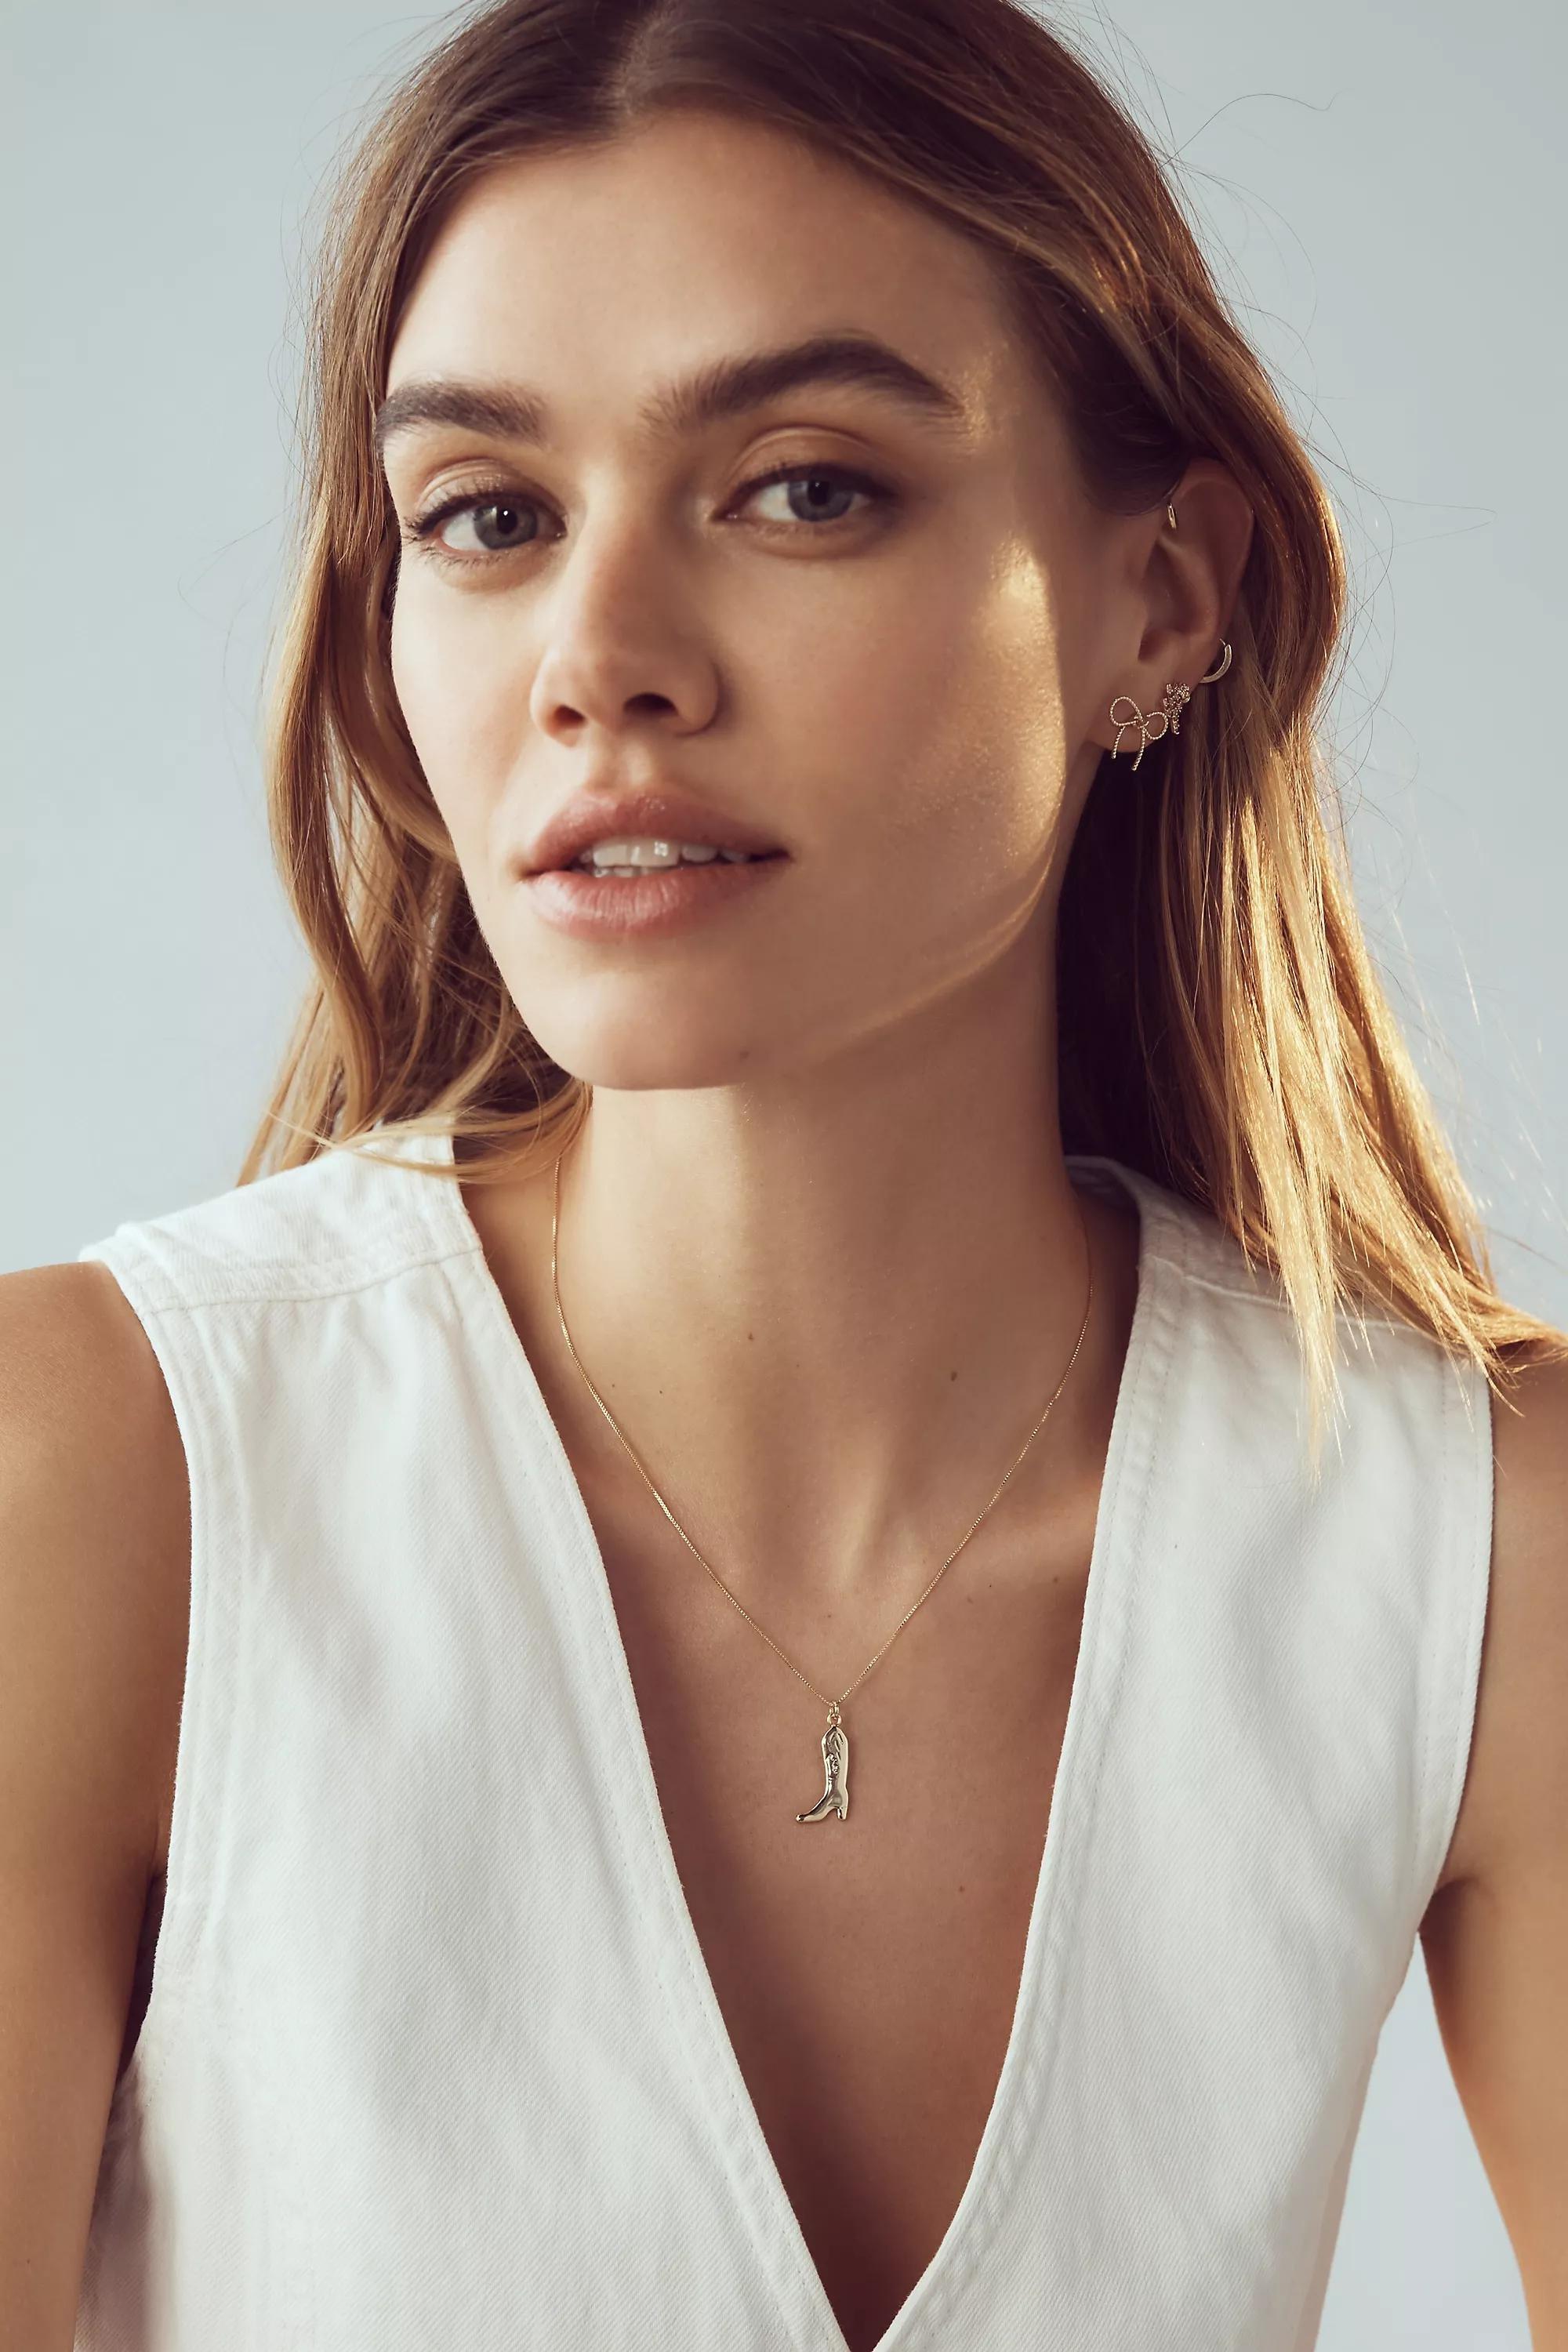 Anthropologie - Pave Cowboy Charm Necklace, Gold-Plated